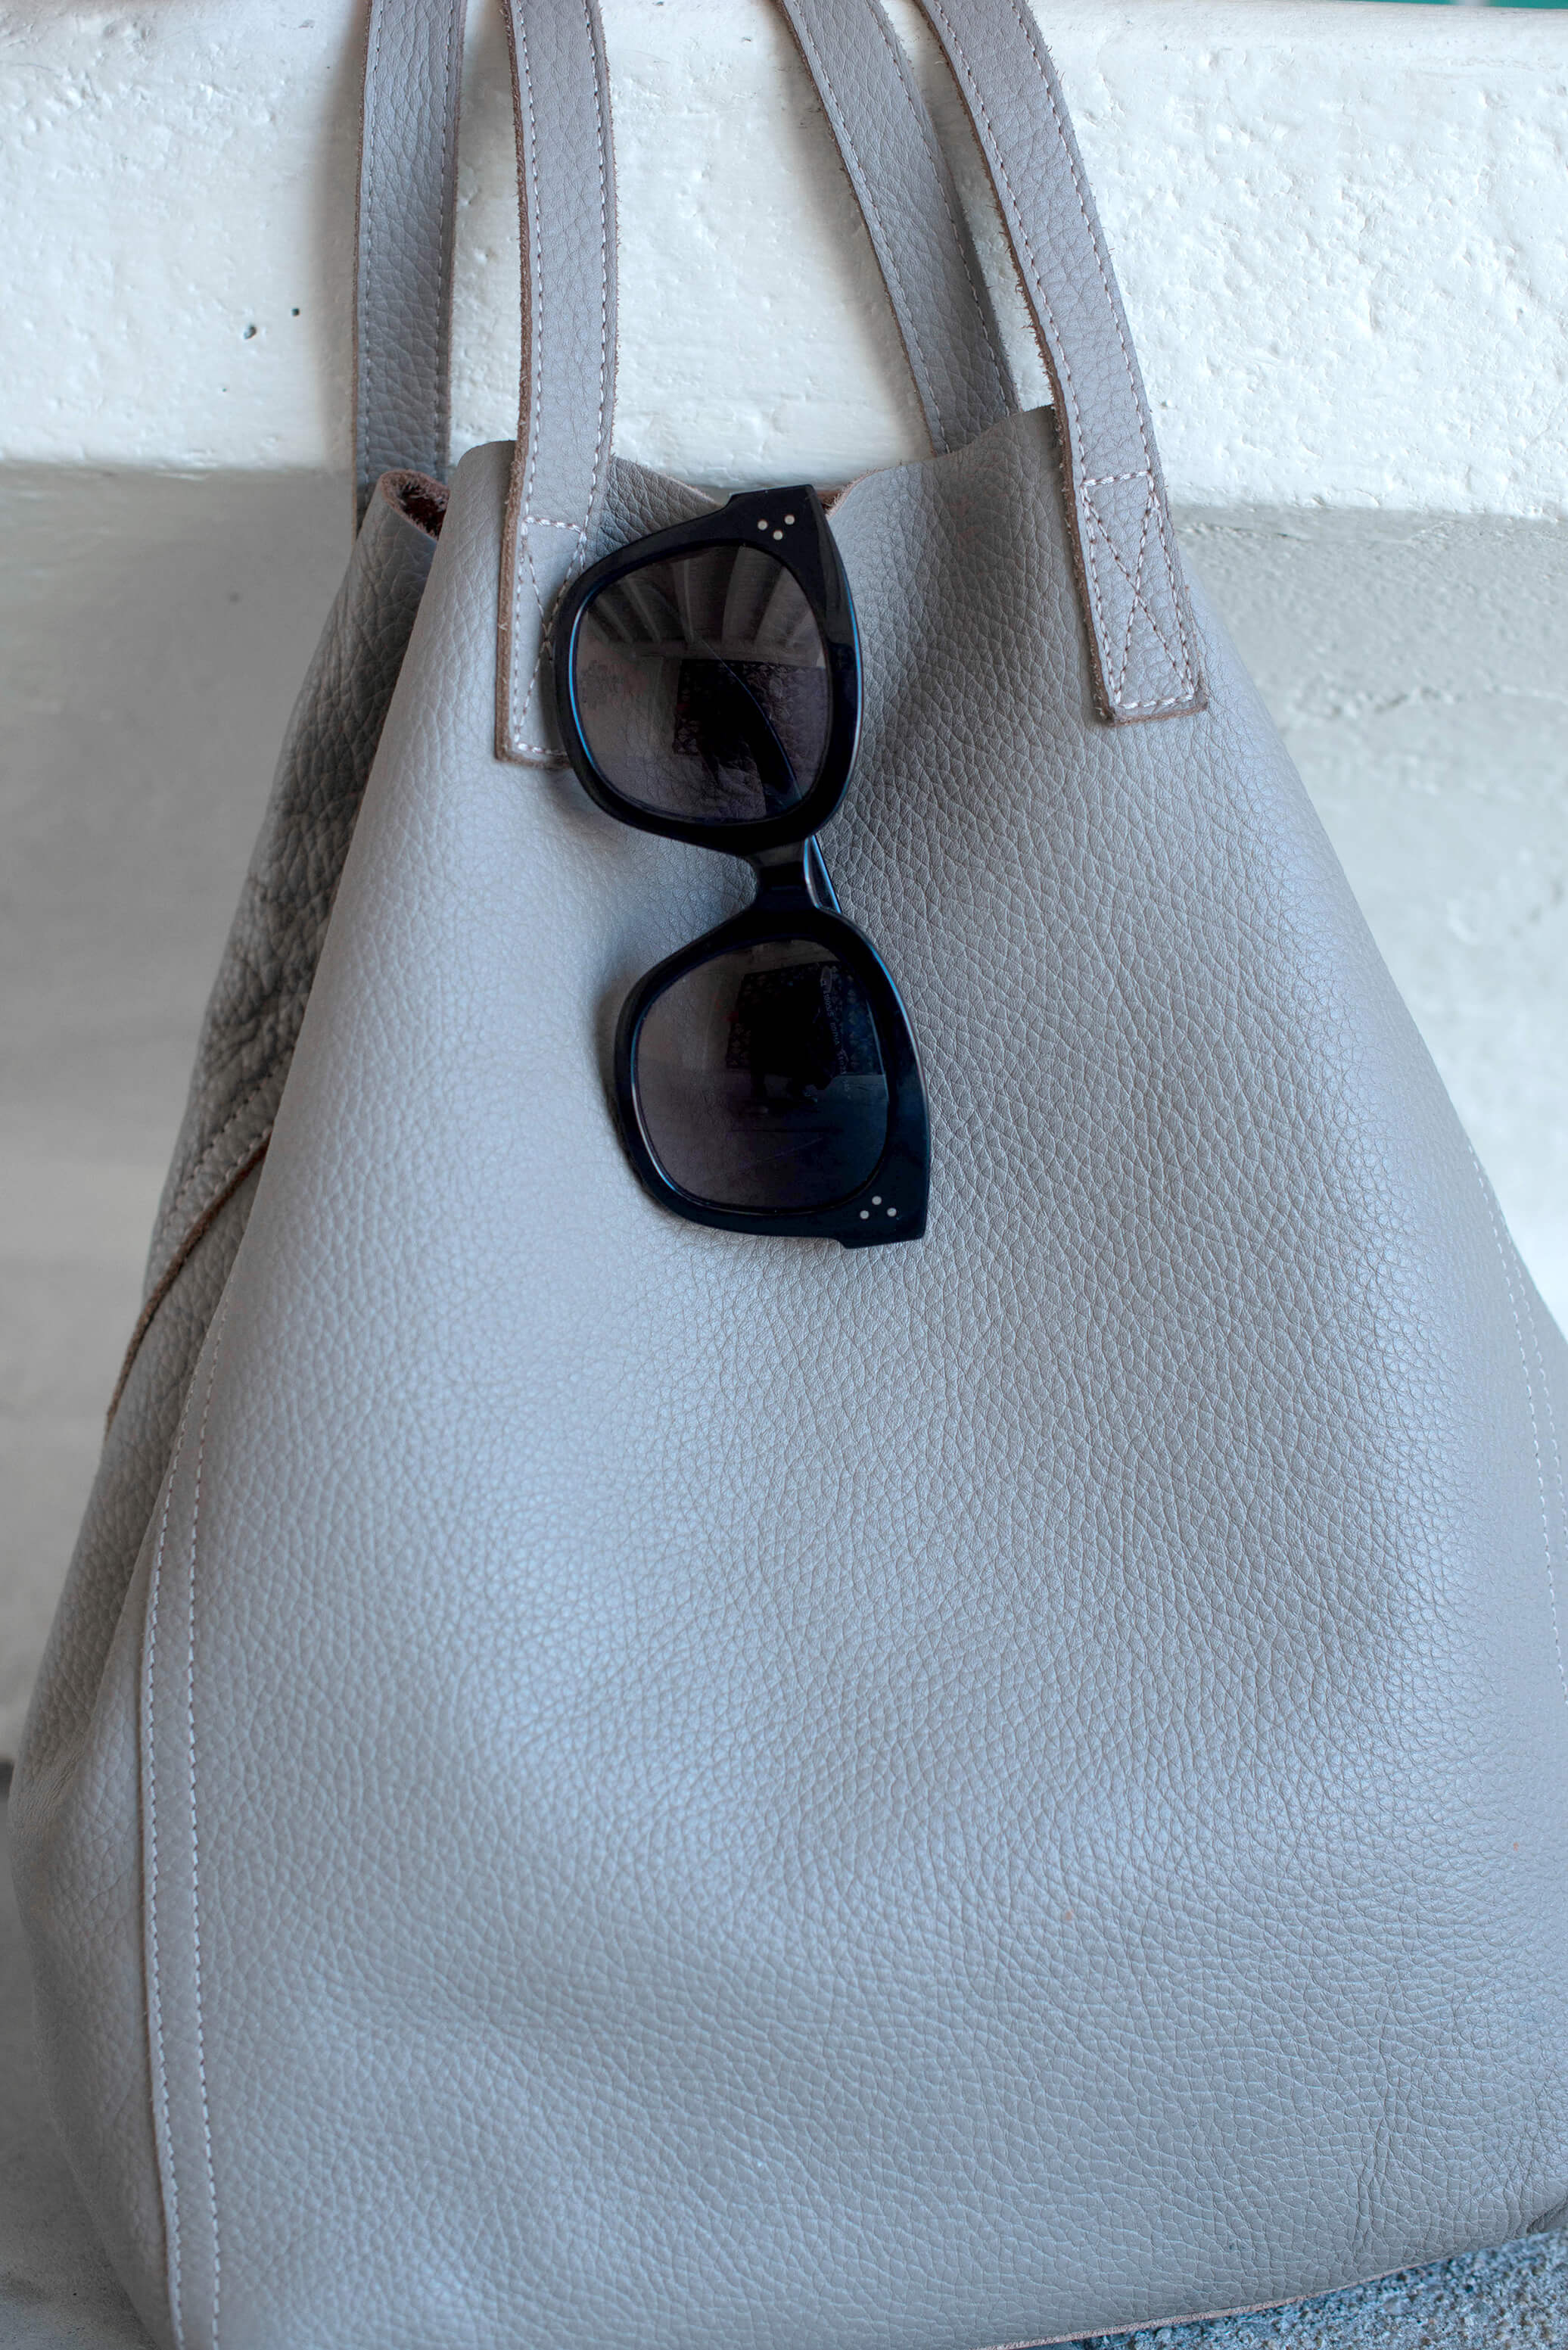 cuyana tote and celine audrey sunglasses